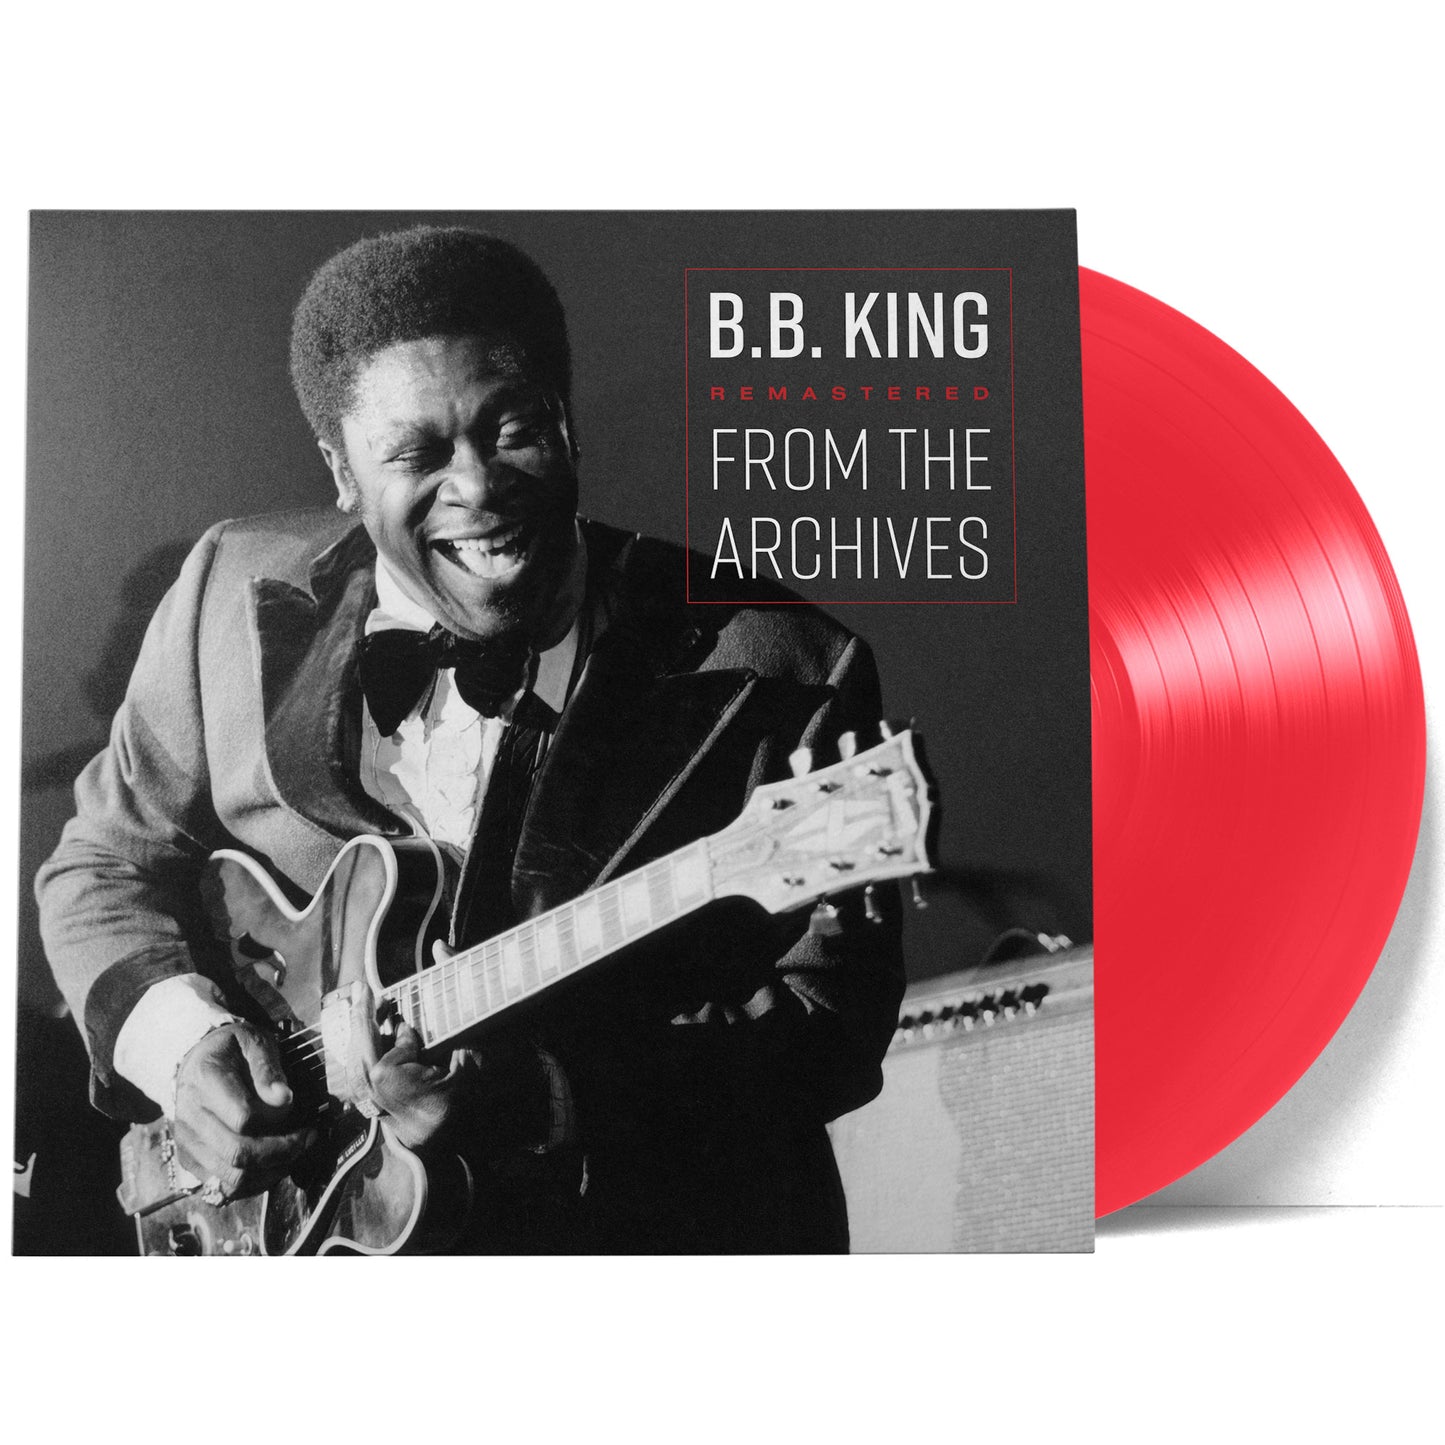 B.B. King Remastered From The Archives (Monostereo Exclusive) | Vinyl